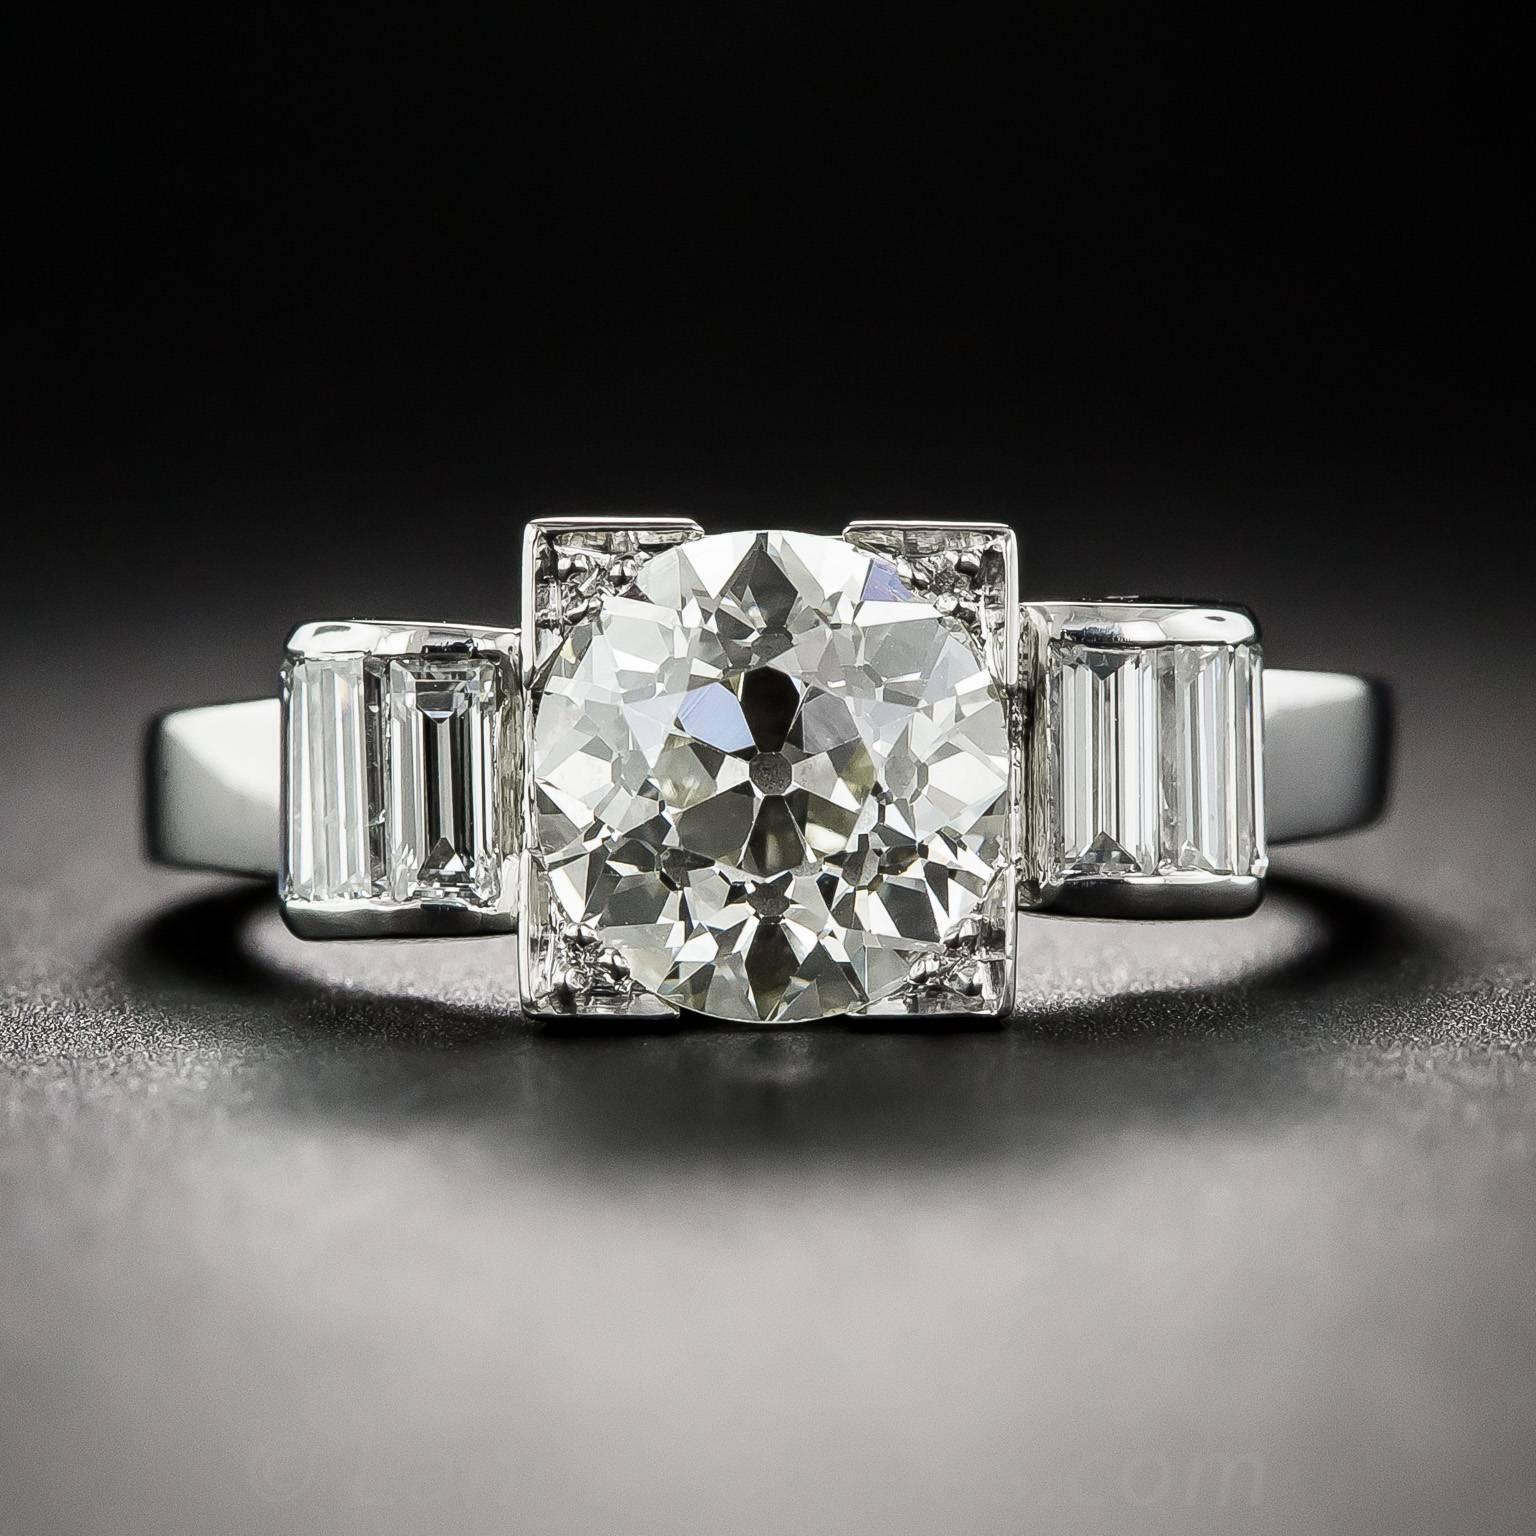 Architectural elegance with a modern twist defines this classic, original Art Deco engagement ring dating from the 1920s.  Looking large and sumptuous, a bright and shining European-cut diamond, weighing 2.50 carats, radiates from within a square